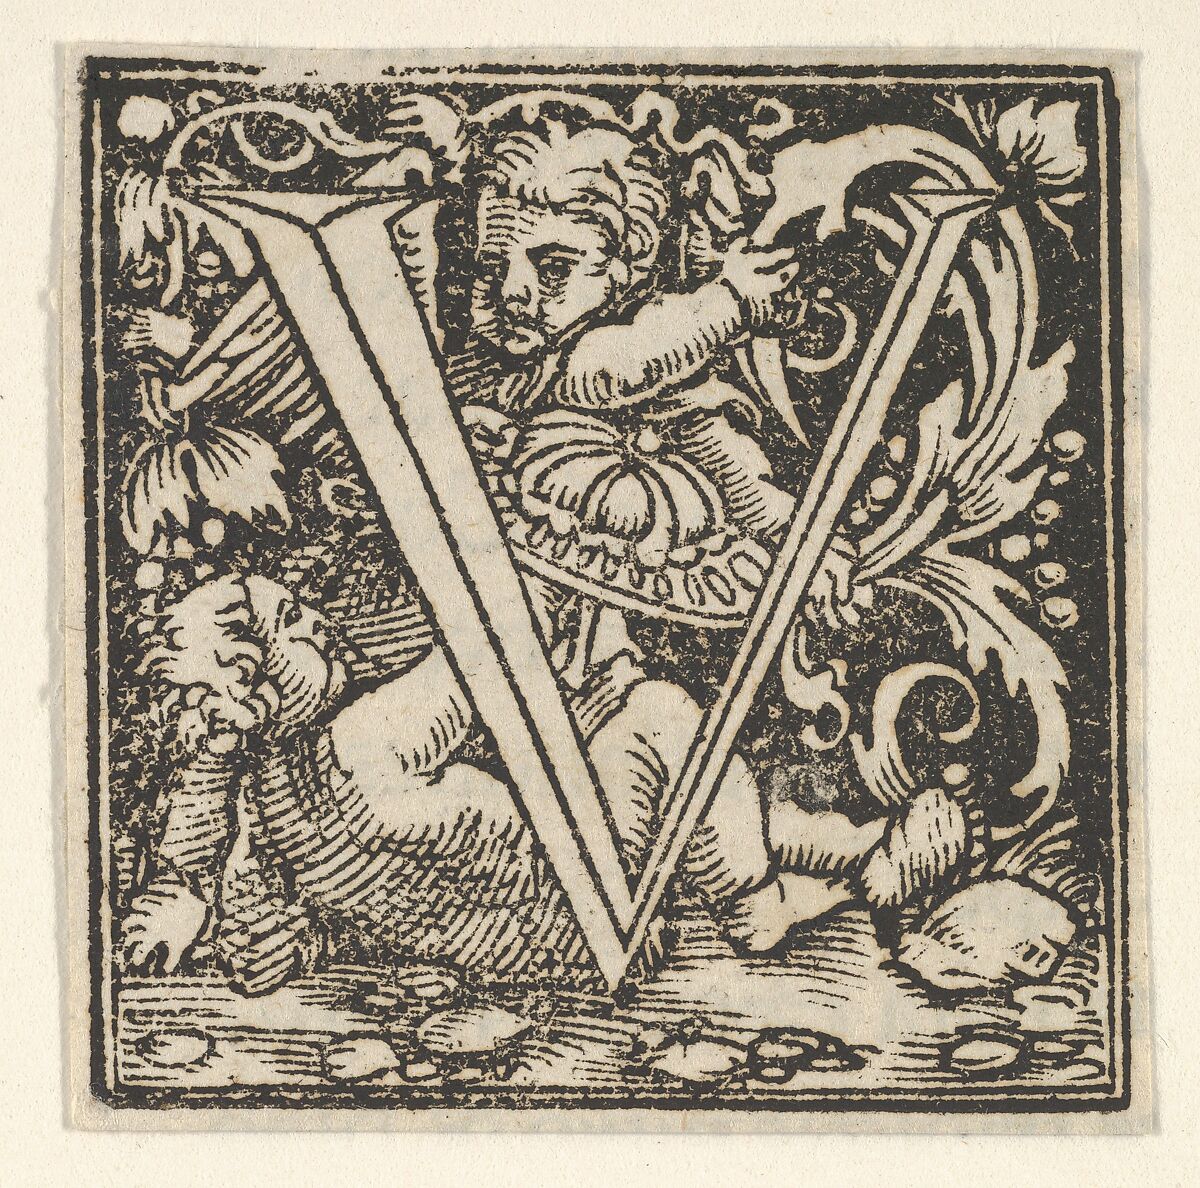 Initial letter V with putti, Heinrich Vogtherr the Elder (German, born 1490, active 1538–1540), Woodcut 